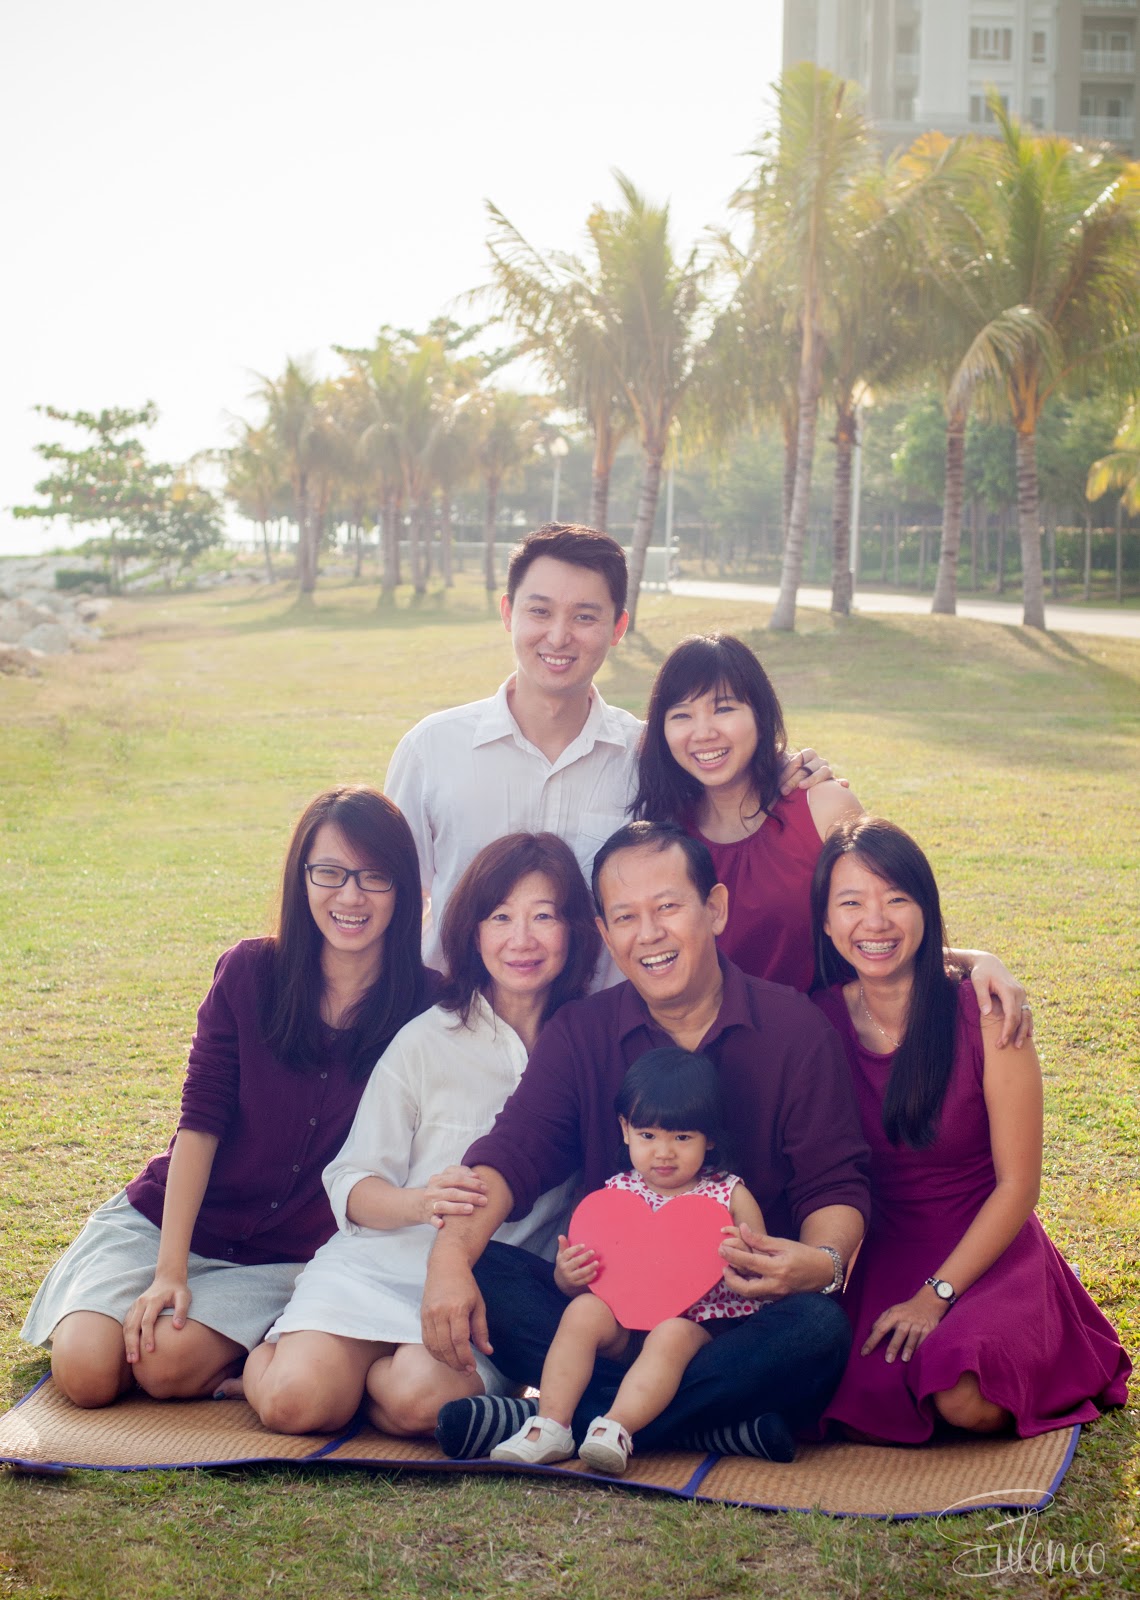 Make It Count: The Khoo Family